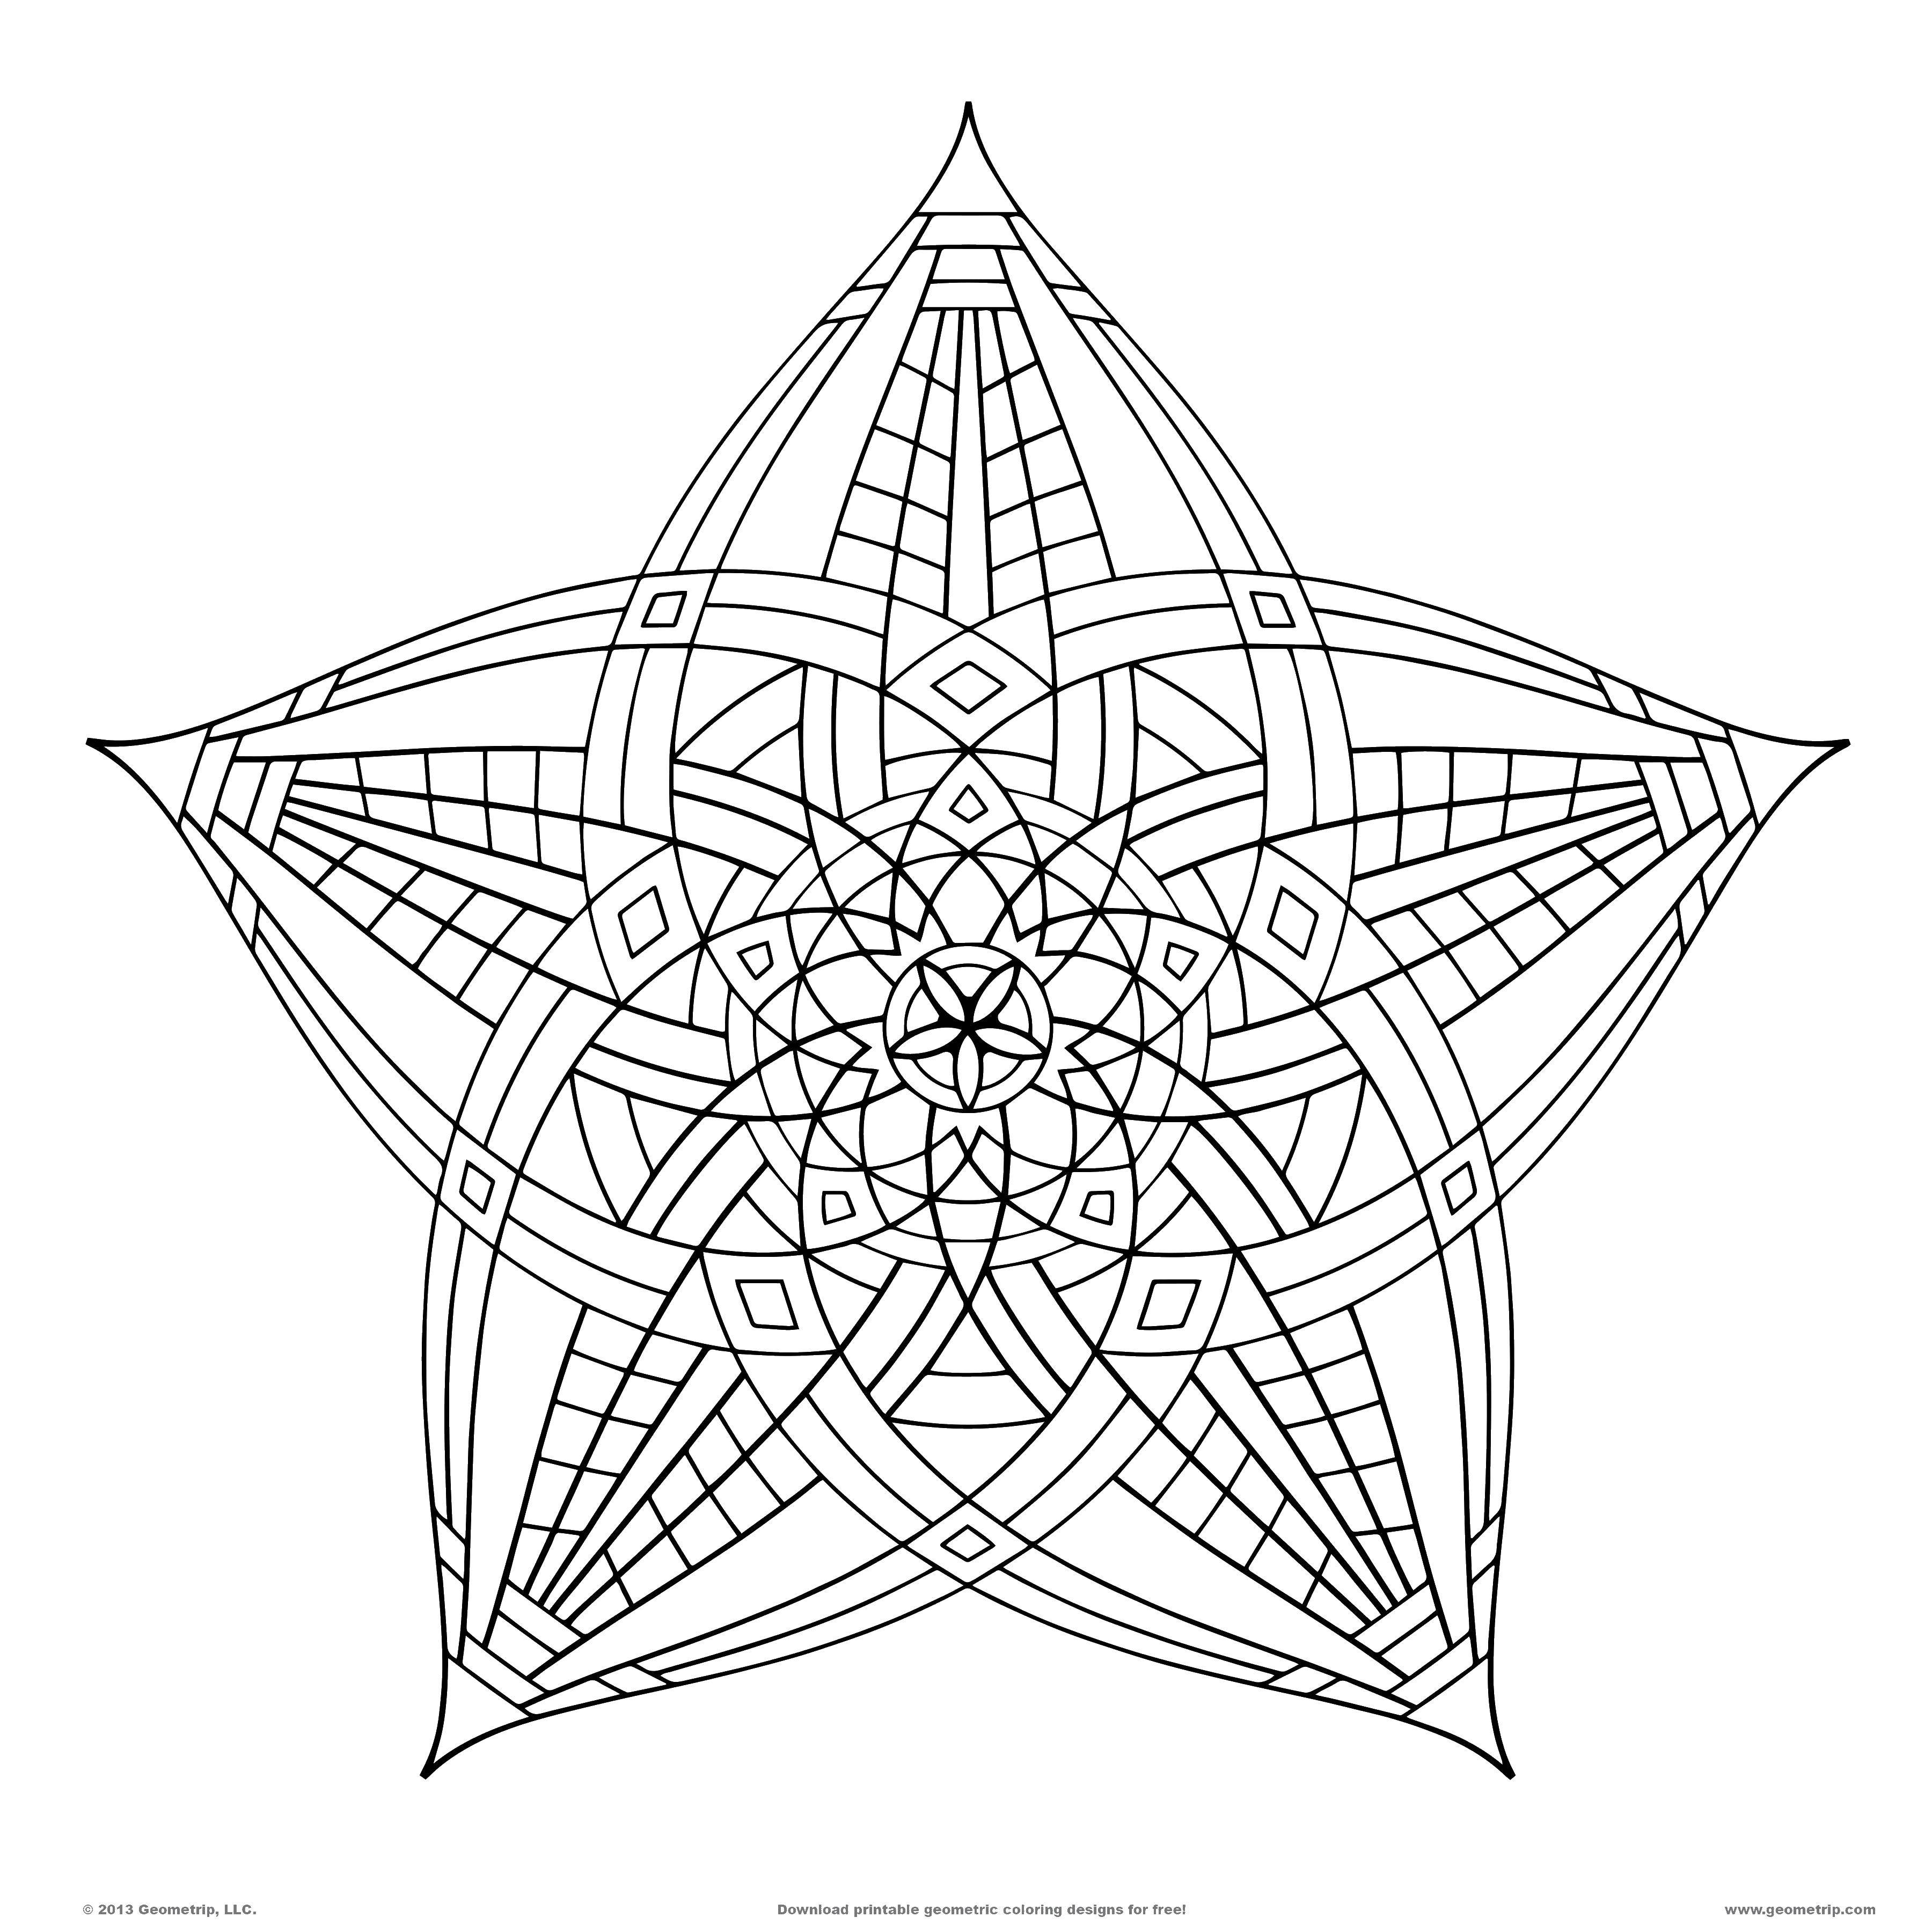 Coloring Flower star. Category Patterns. Tags:  patterns, flower, star.